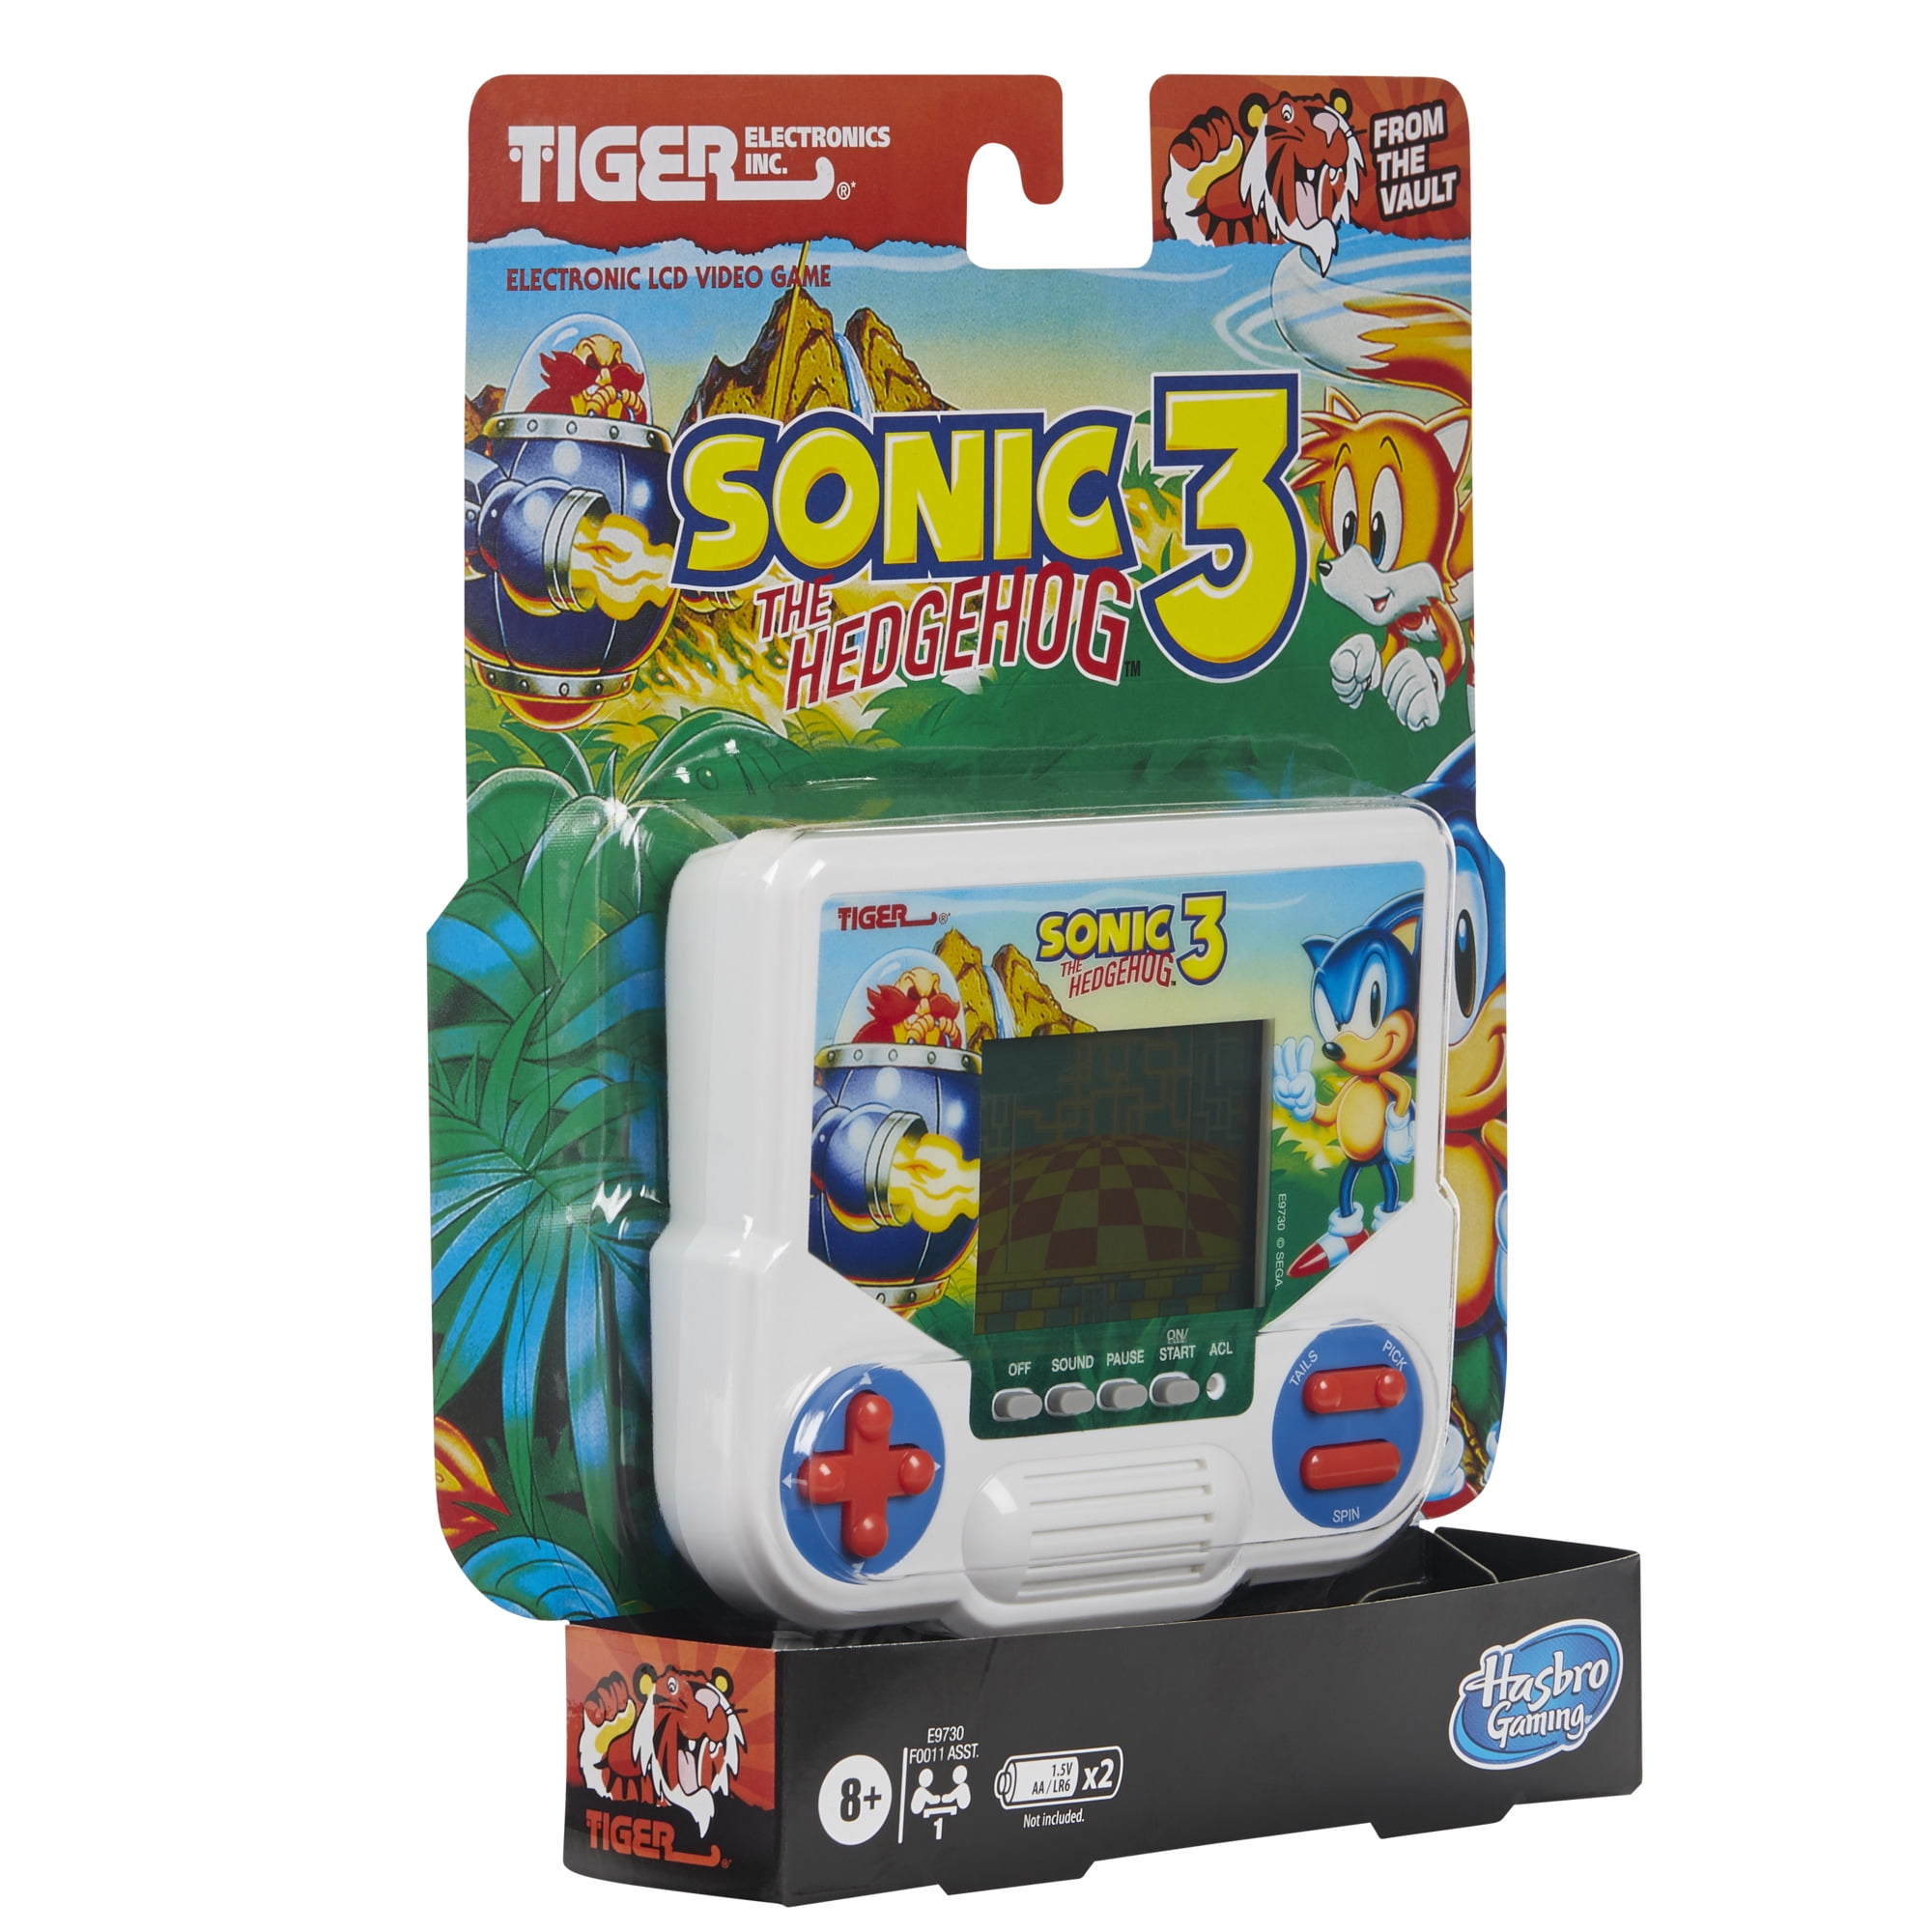 Tiger Electronics Sonic the Hedgehog 3 Electronic LCD Video Game,  Retro-Inspired Edition, Handheld 1-Player Game, Ages 8 and Up